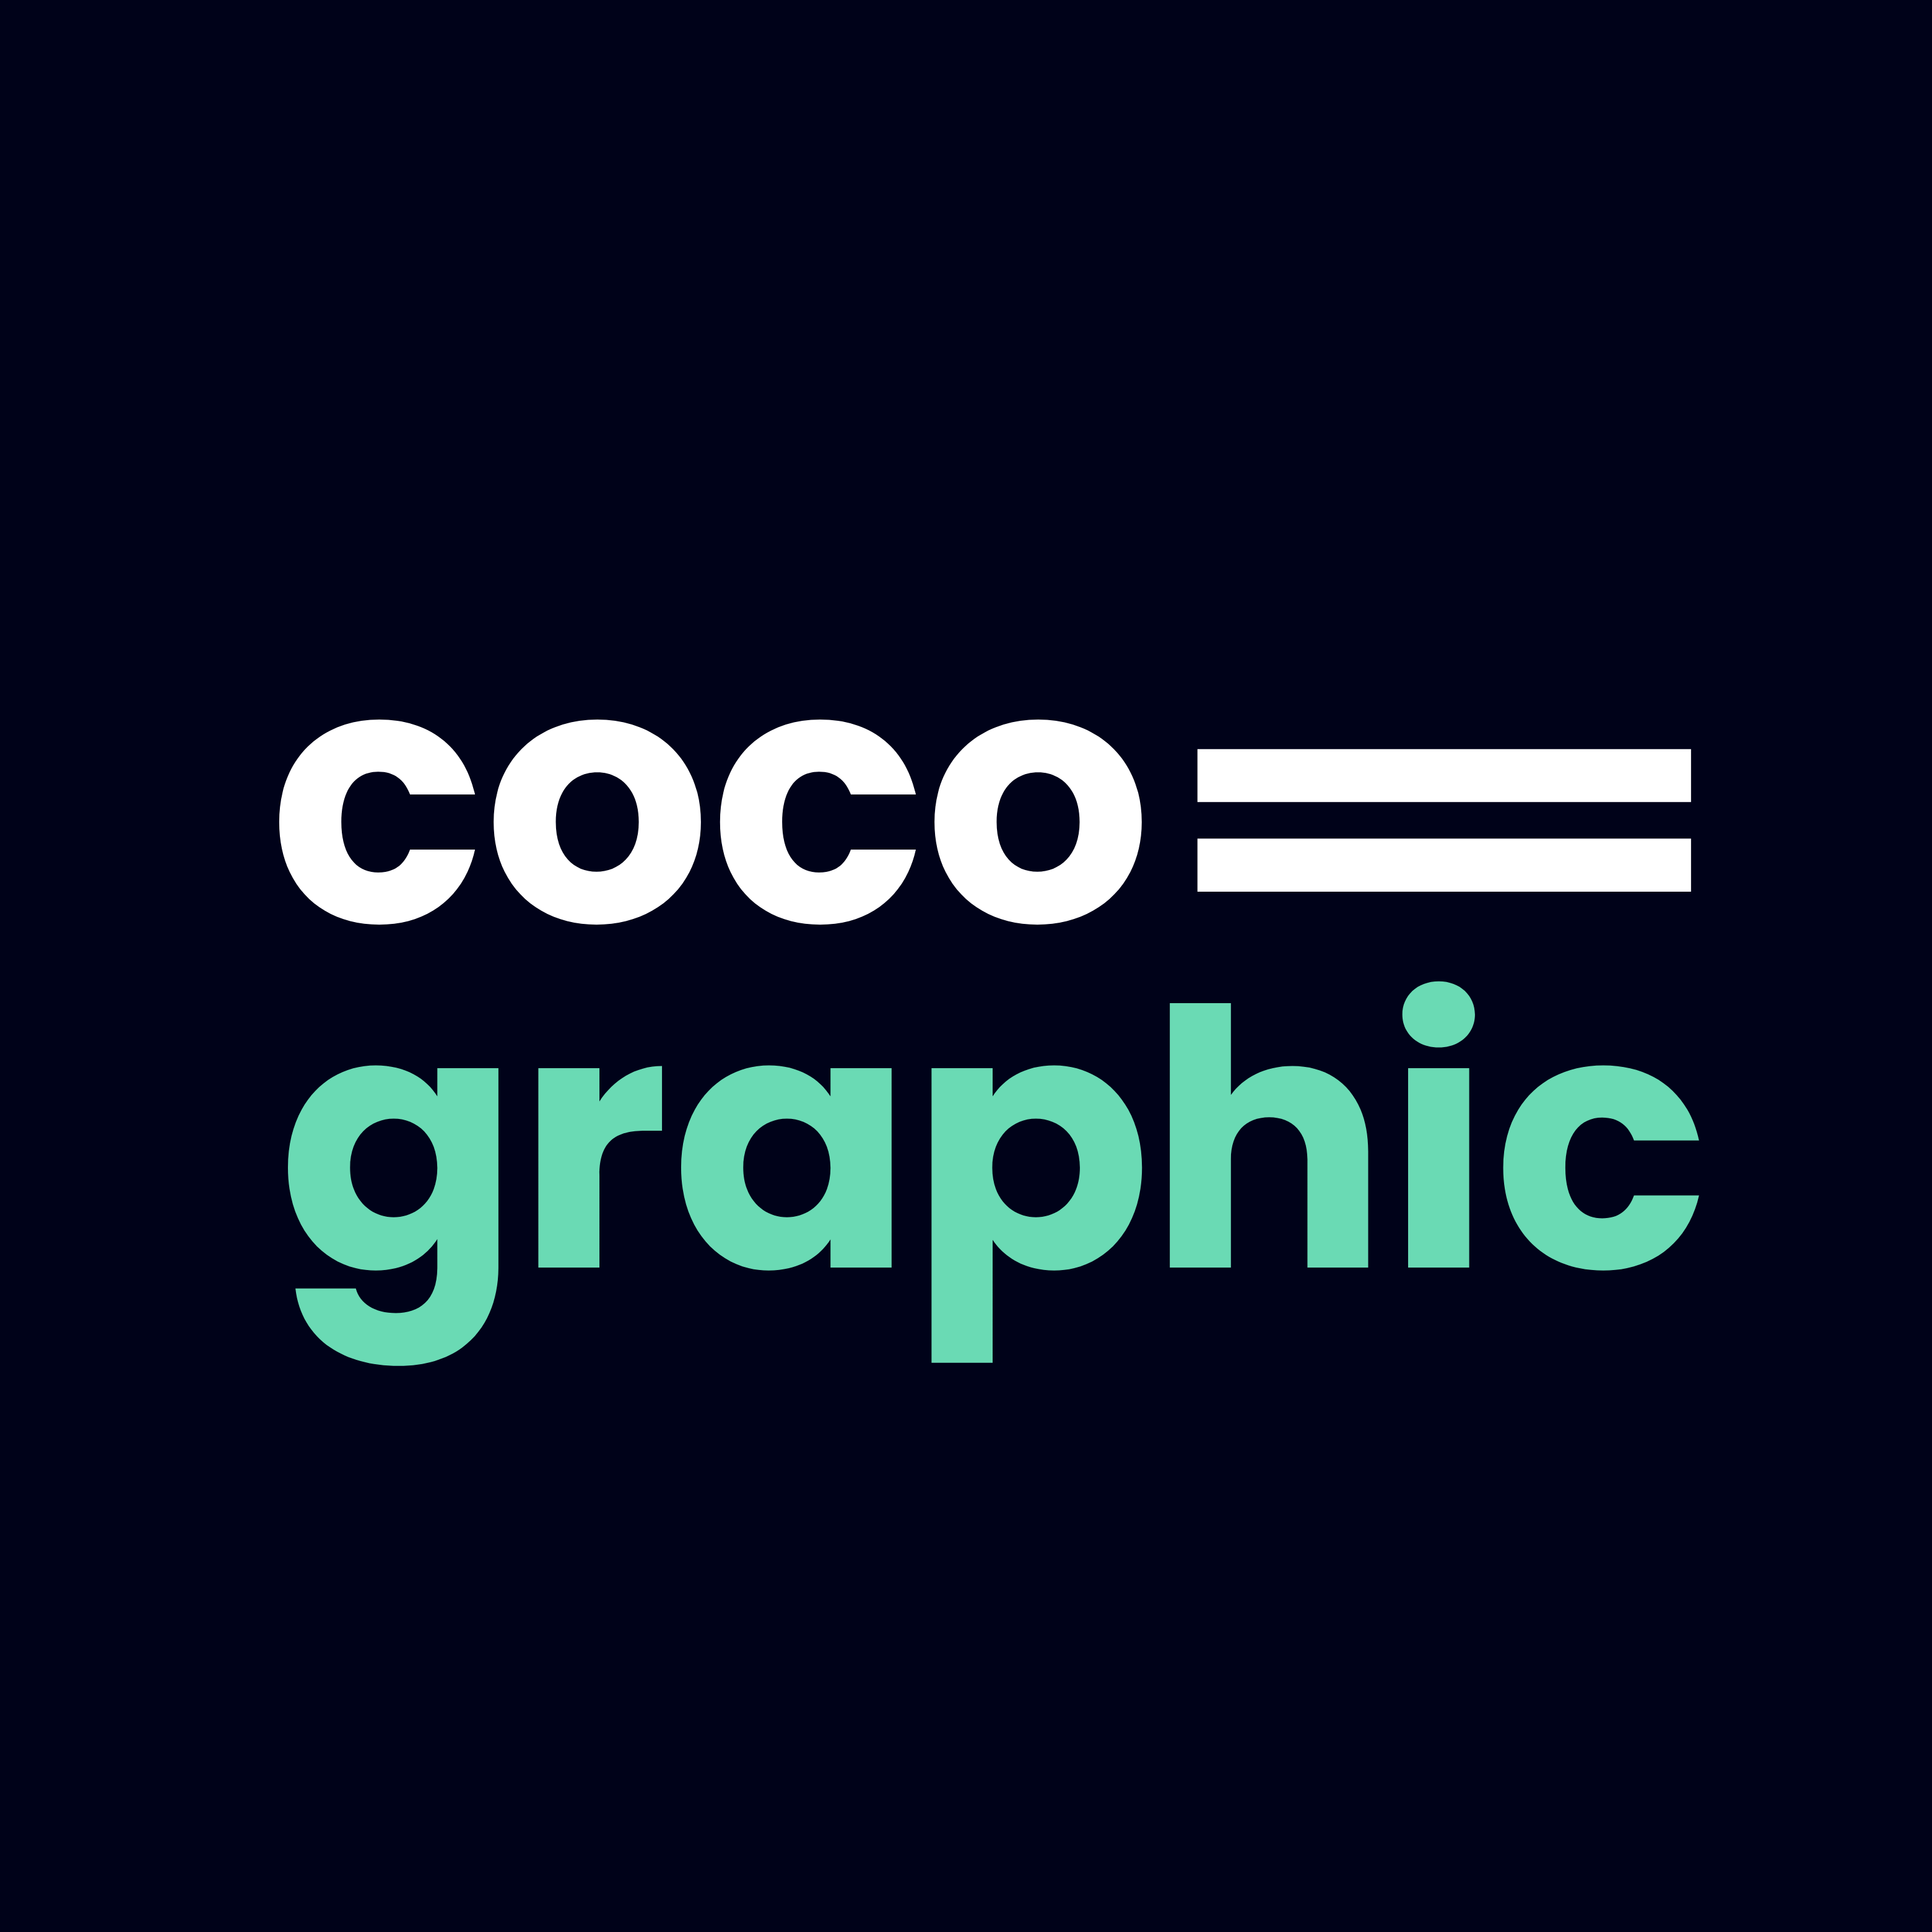 Cocographic